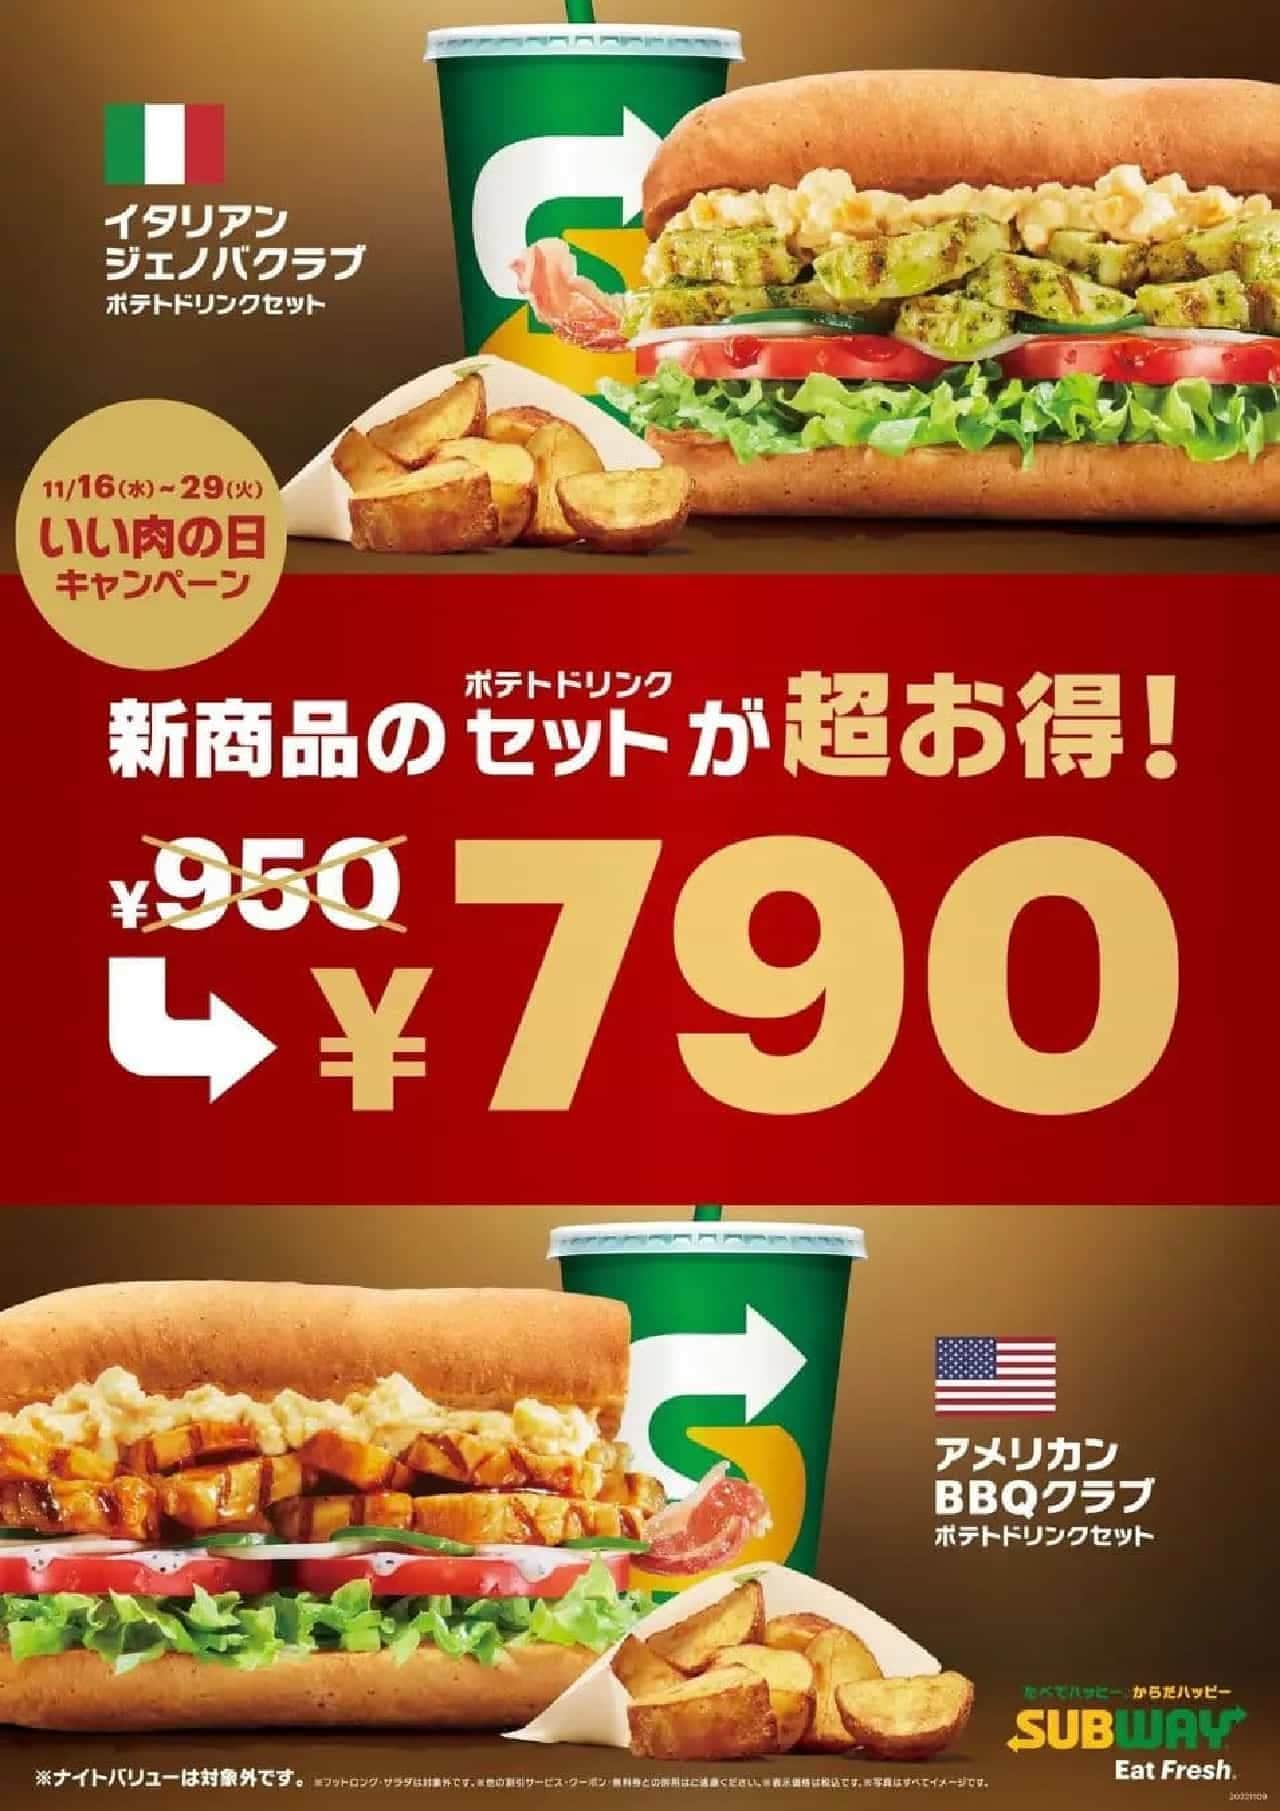 Subway New Menu Summary! Coupons, How to ask for more vegetables